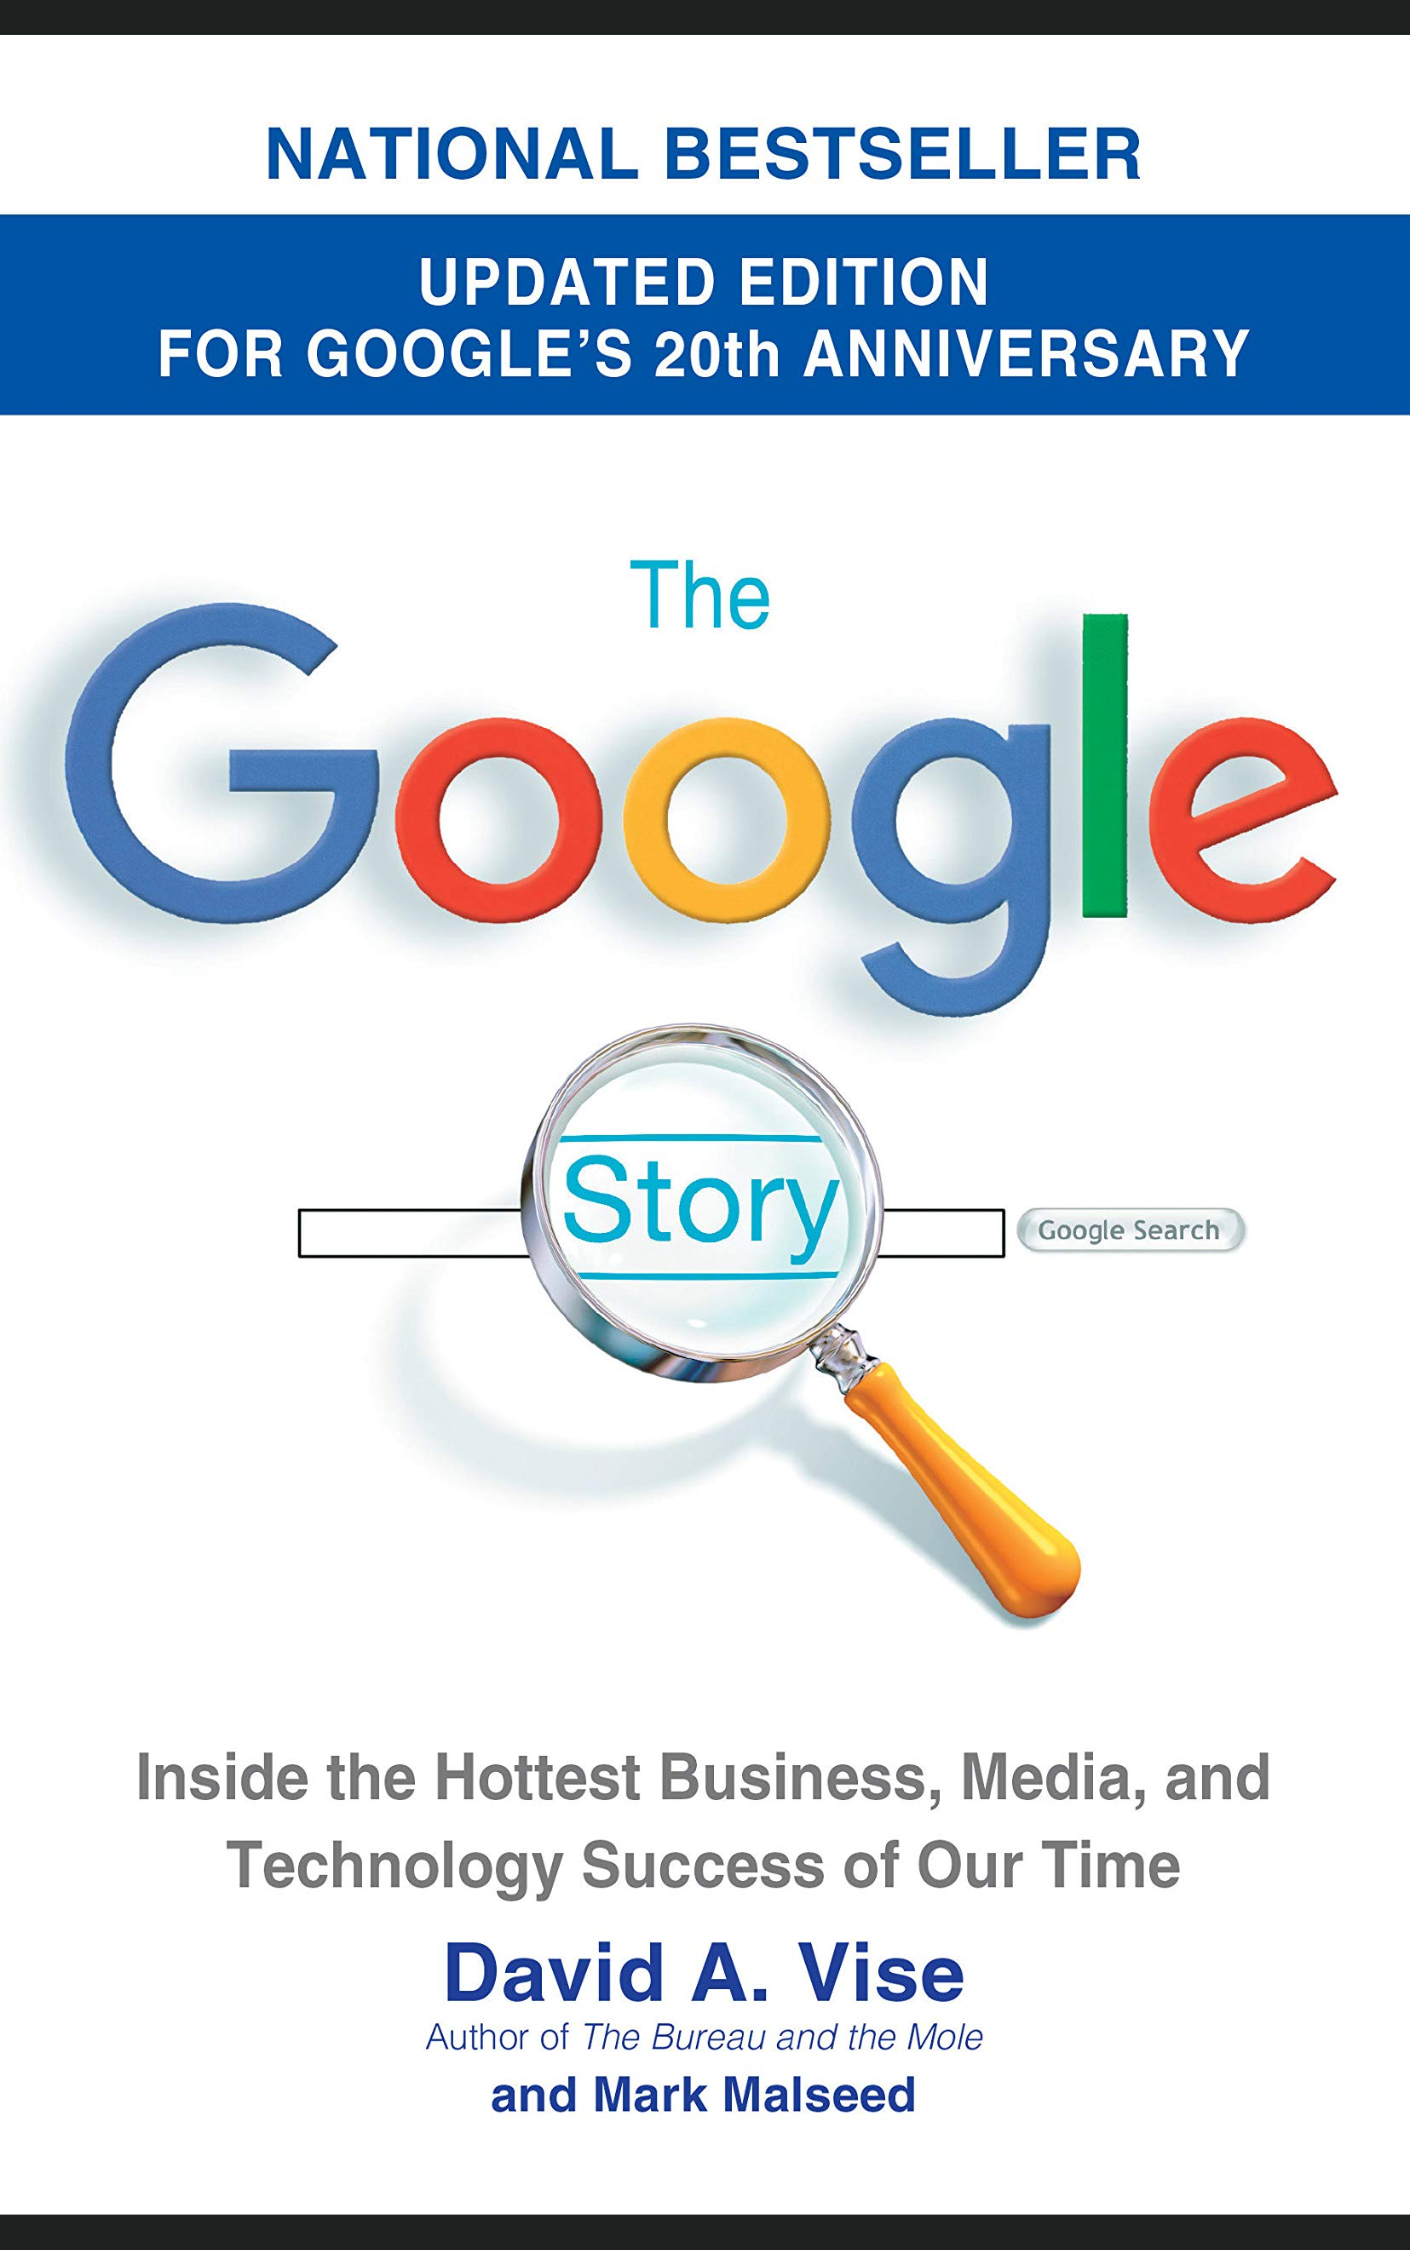 THE GOOGLE STORY by DAVID A VISE